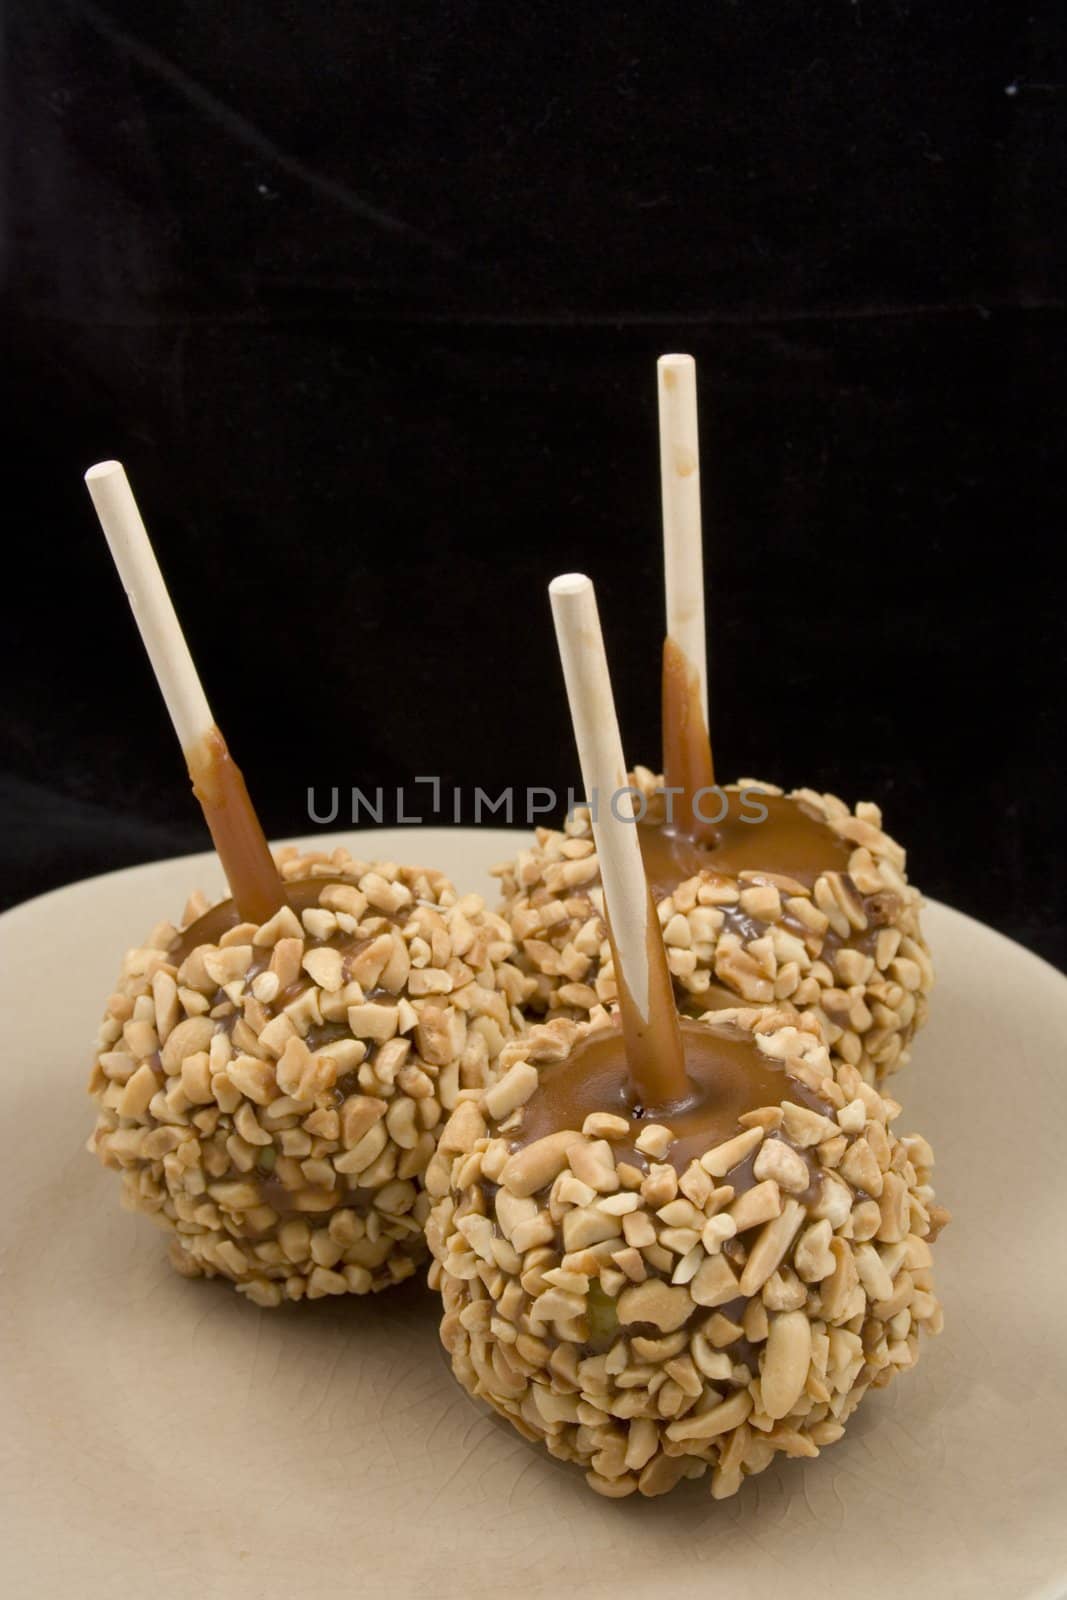 Carmel apples with nuts on a plate just in time for the holidays